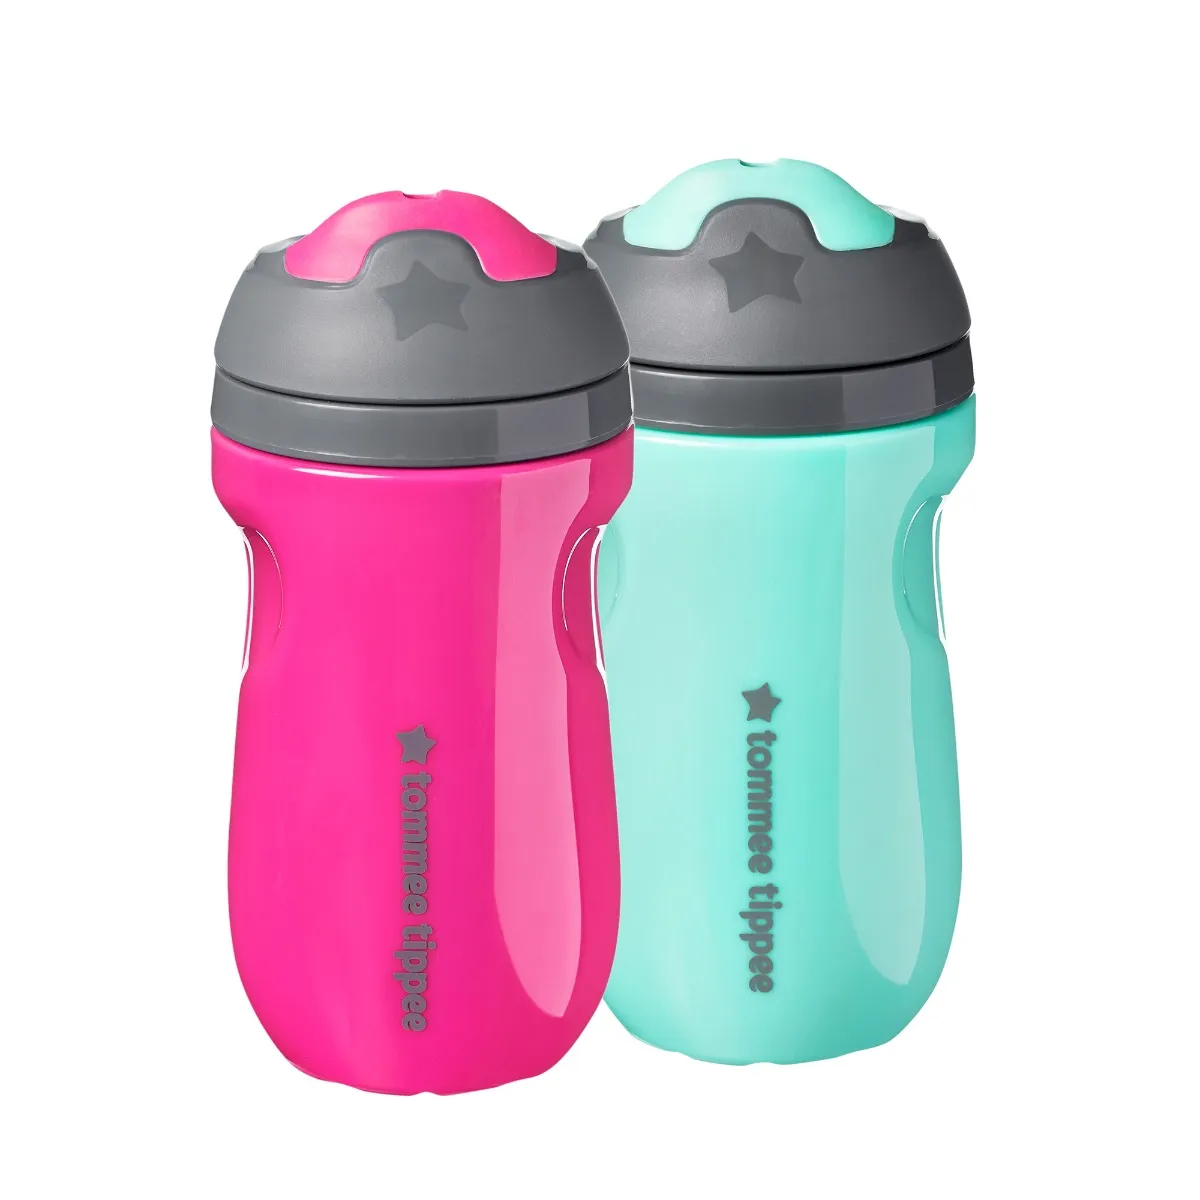 https://secure.tommeetippee.com/media/catalog/product/p/i/pink_and_mint_insulated_sippee_cup.jpg